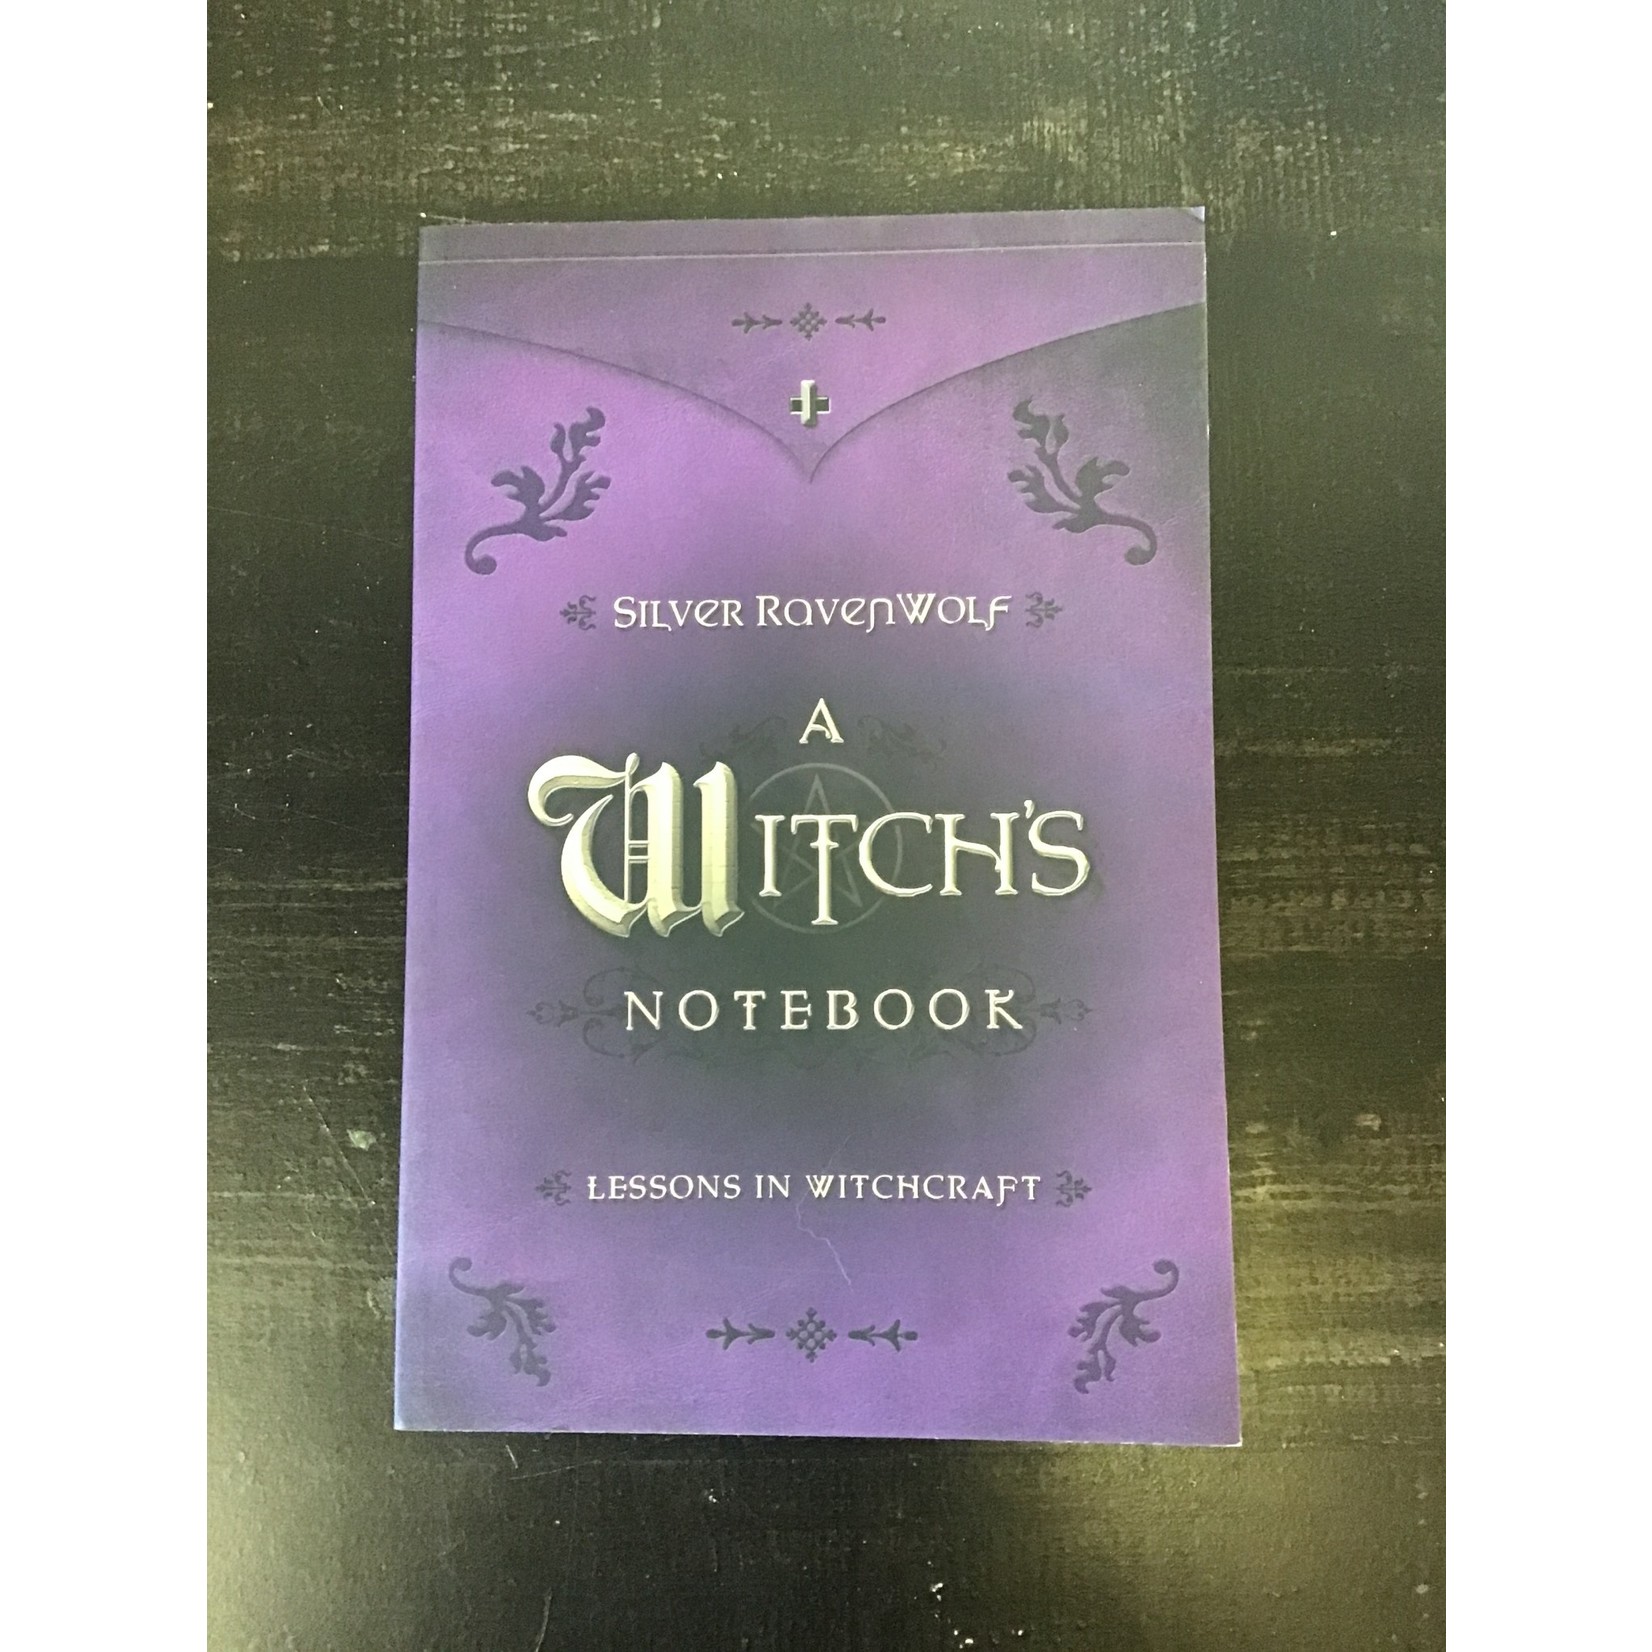 A witch's notebook